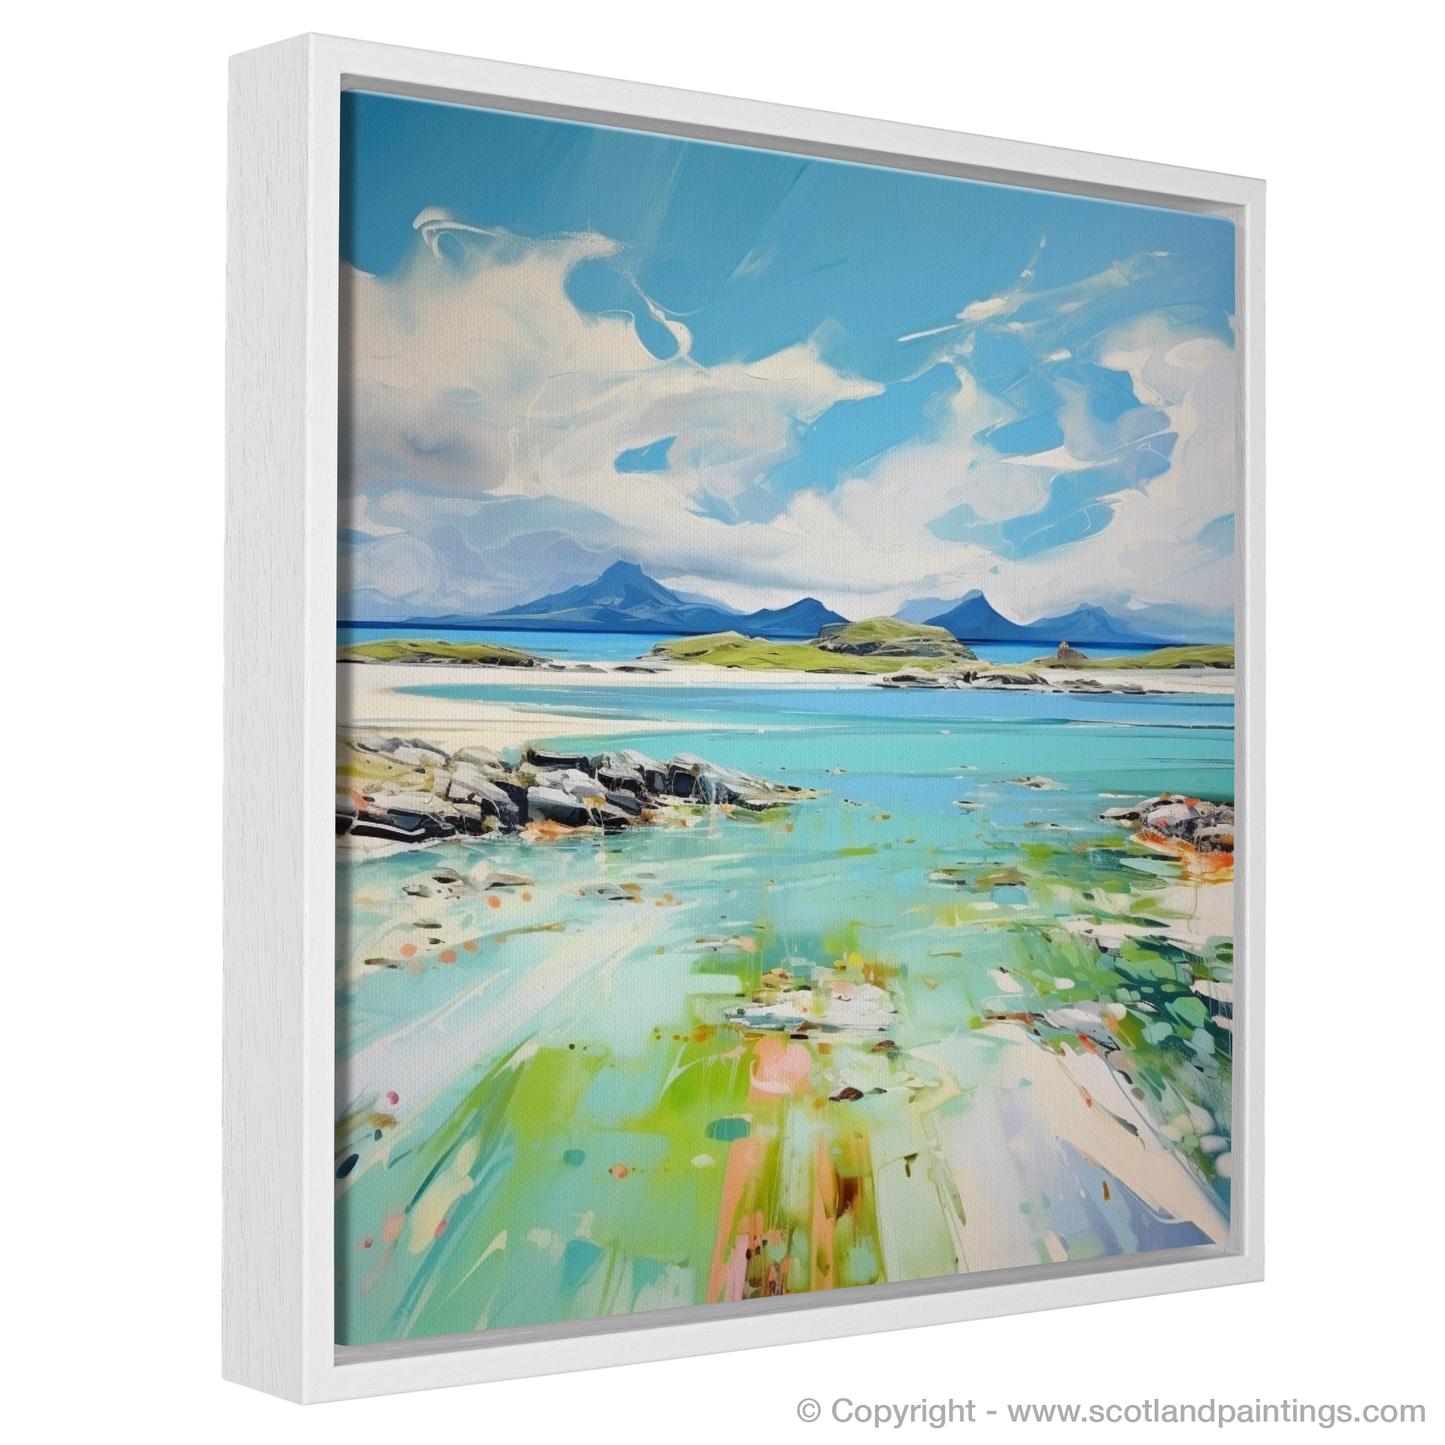 Painting and Art Print of Isle of Jura, Inner Hebrides in summer entitled "Summer Serenity on the Isle of Jura".